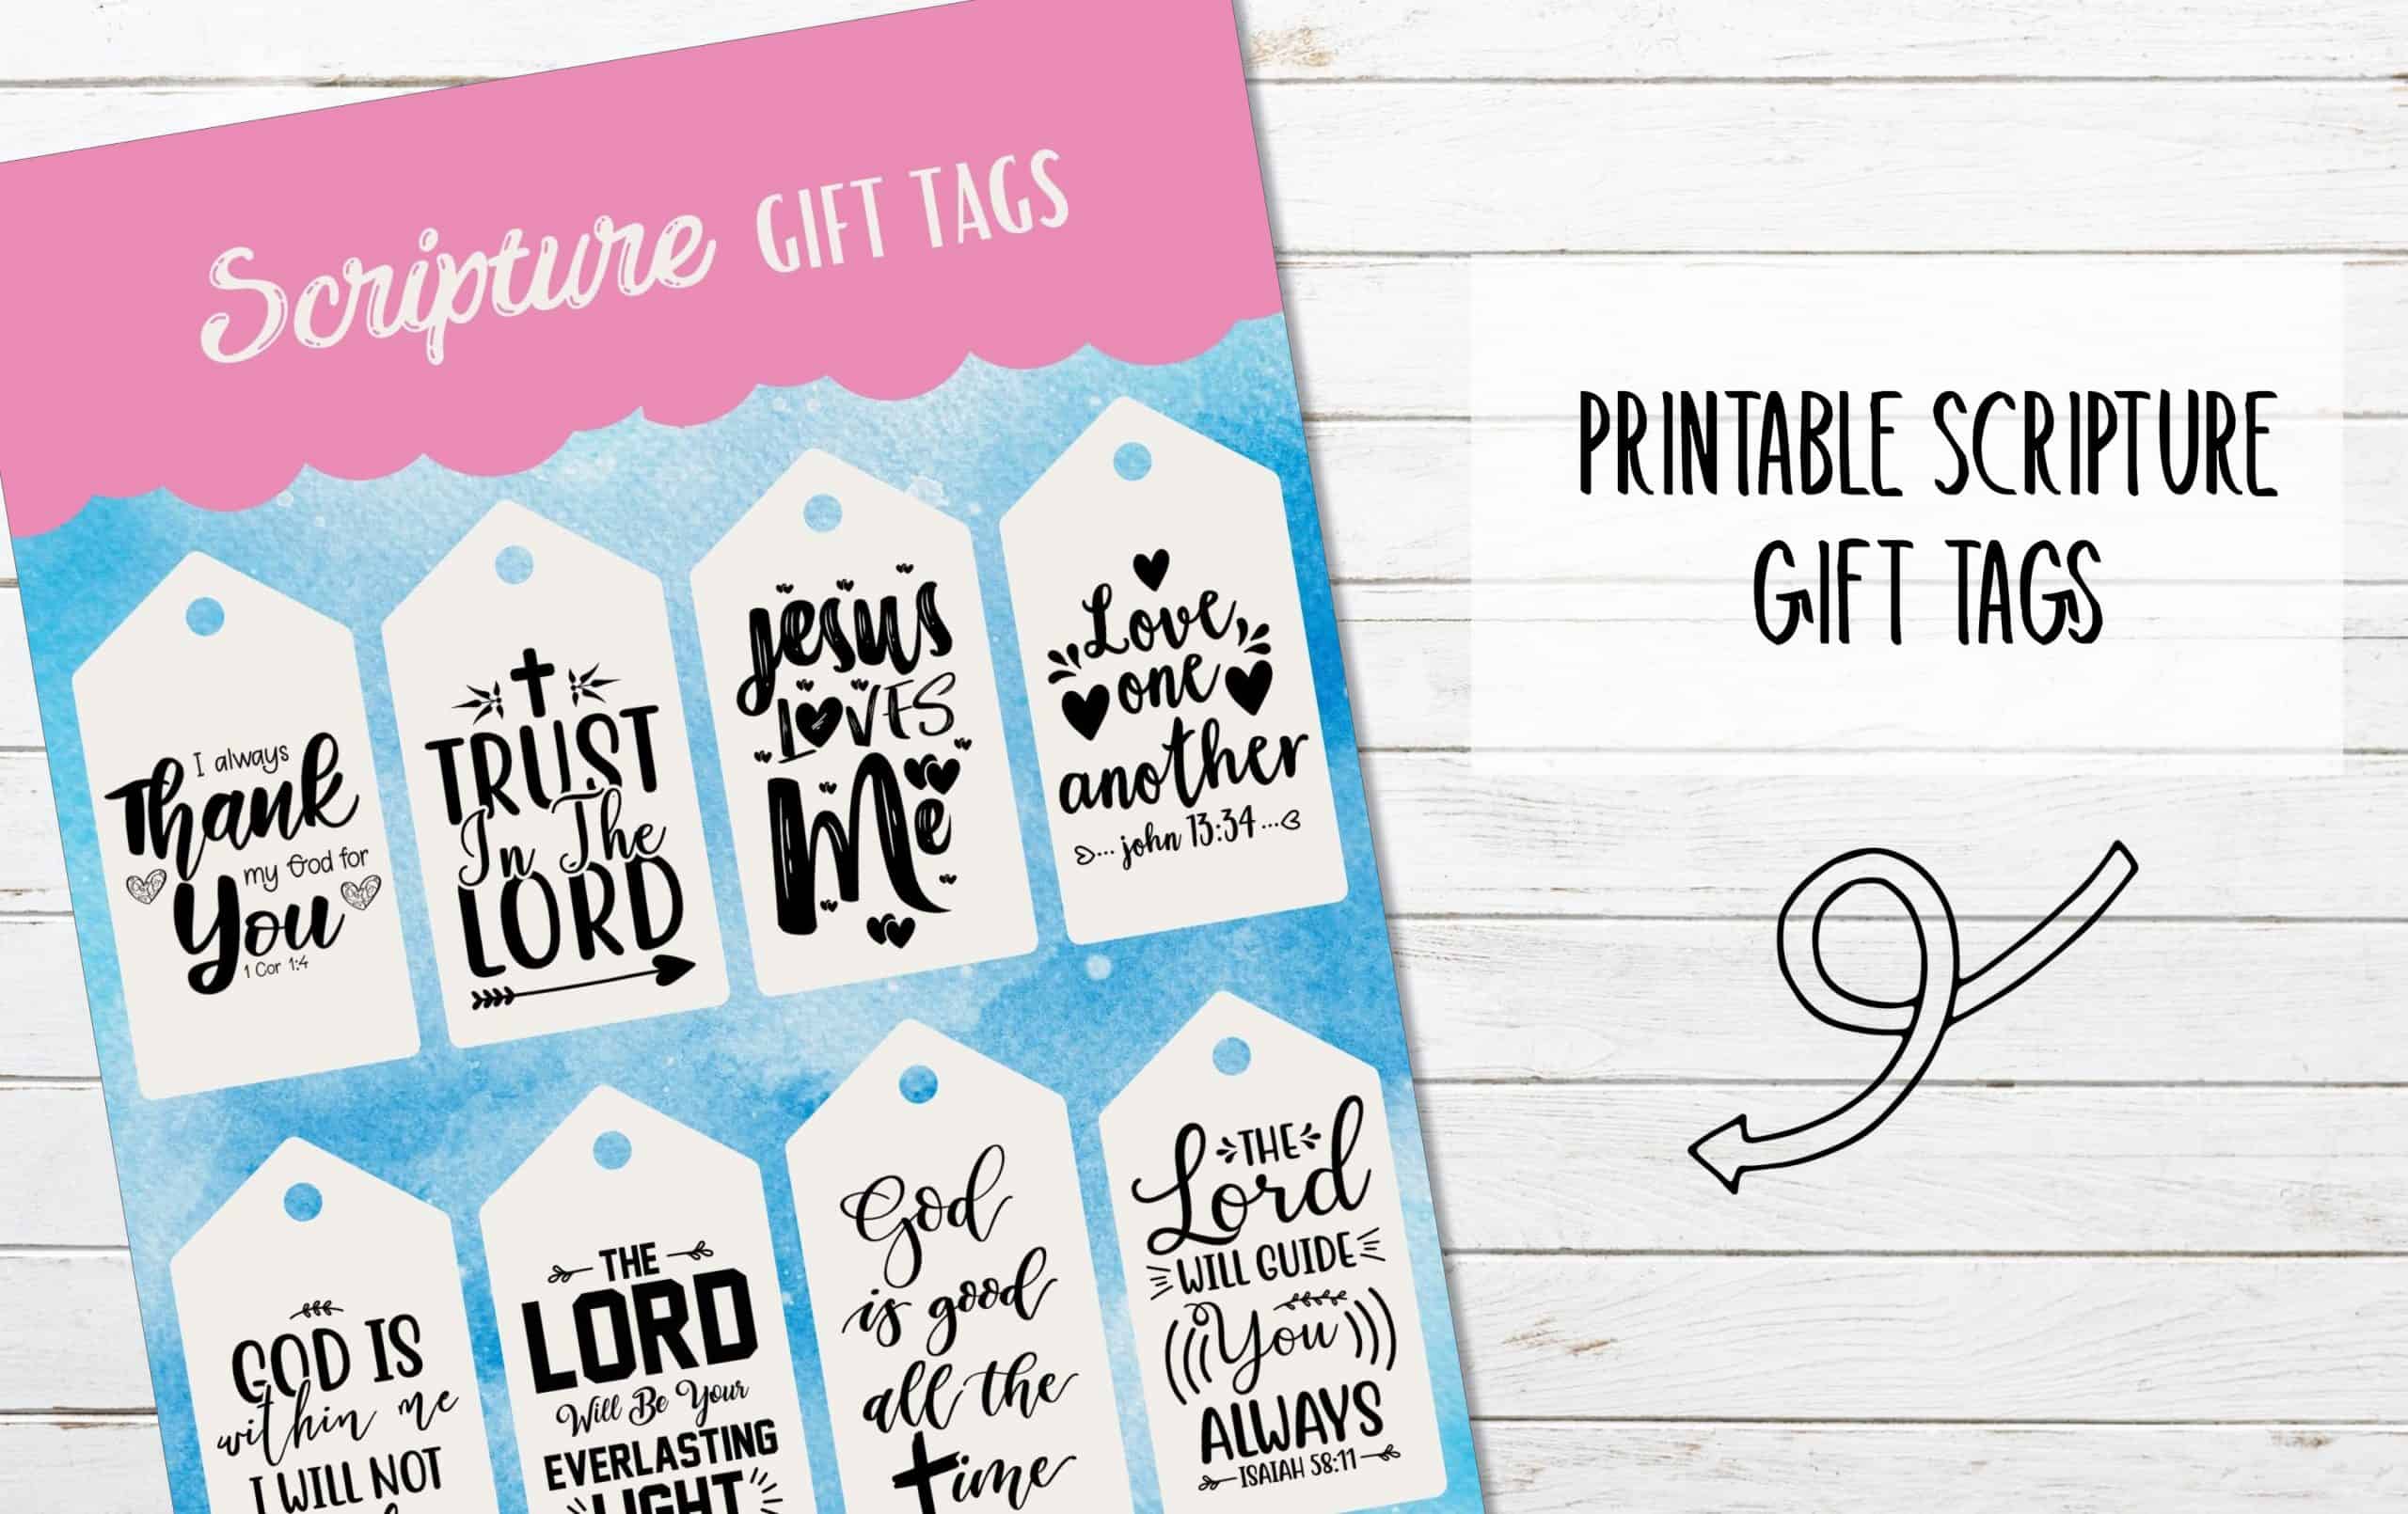 Printable Gift Tags - With scriptures